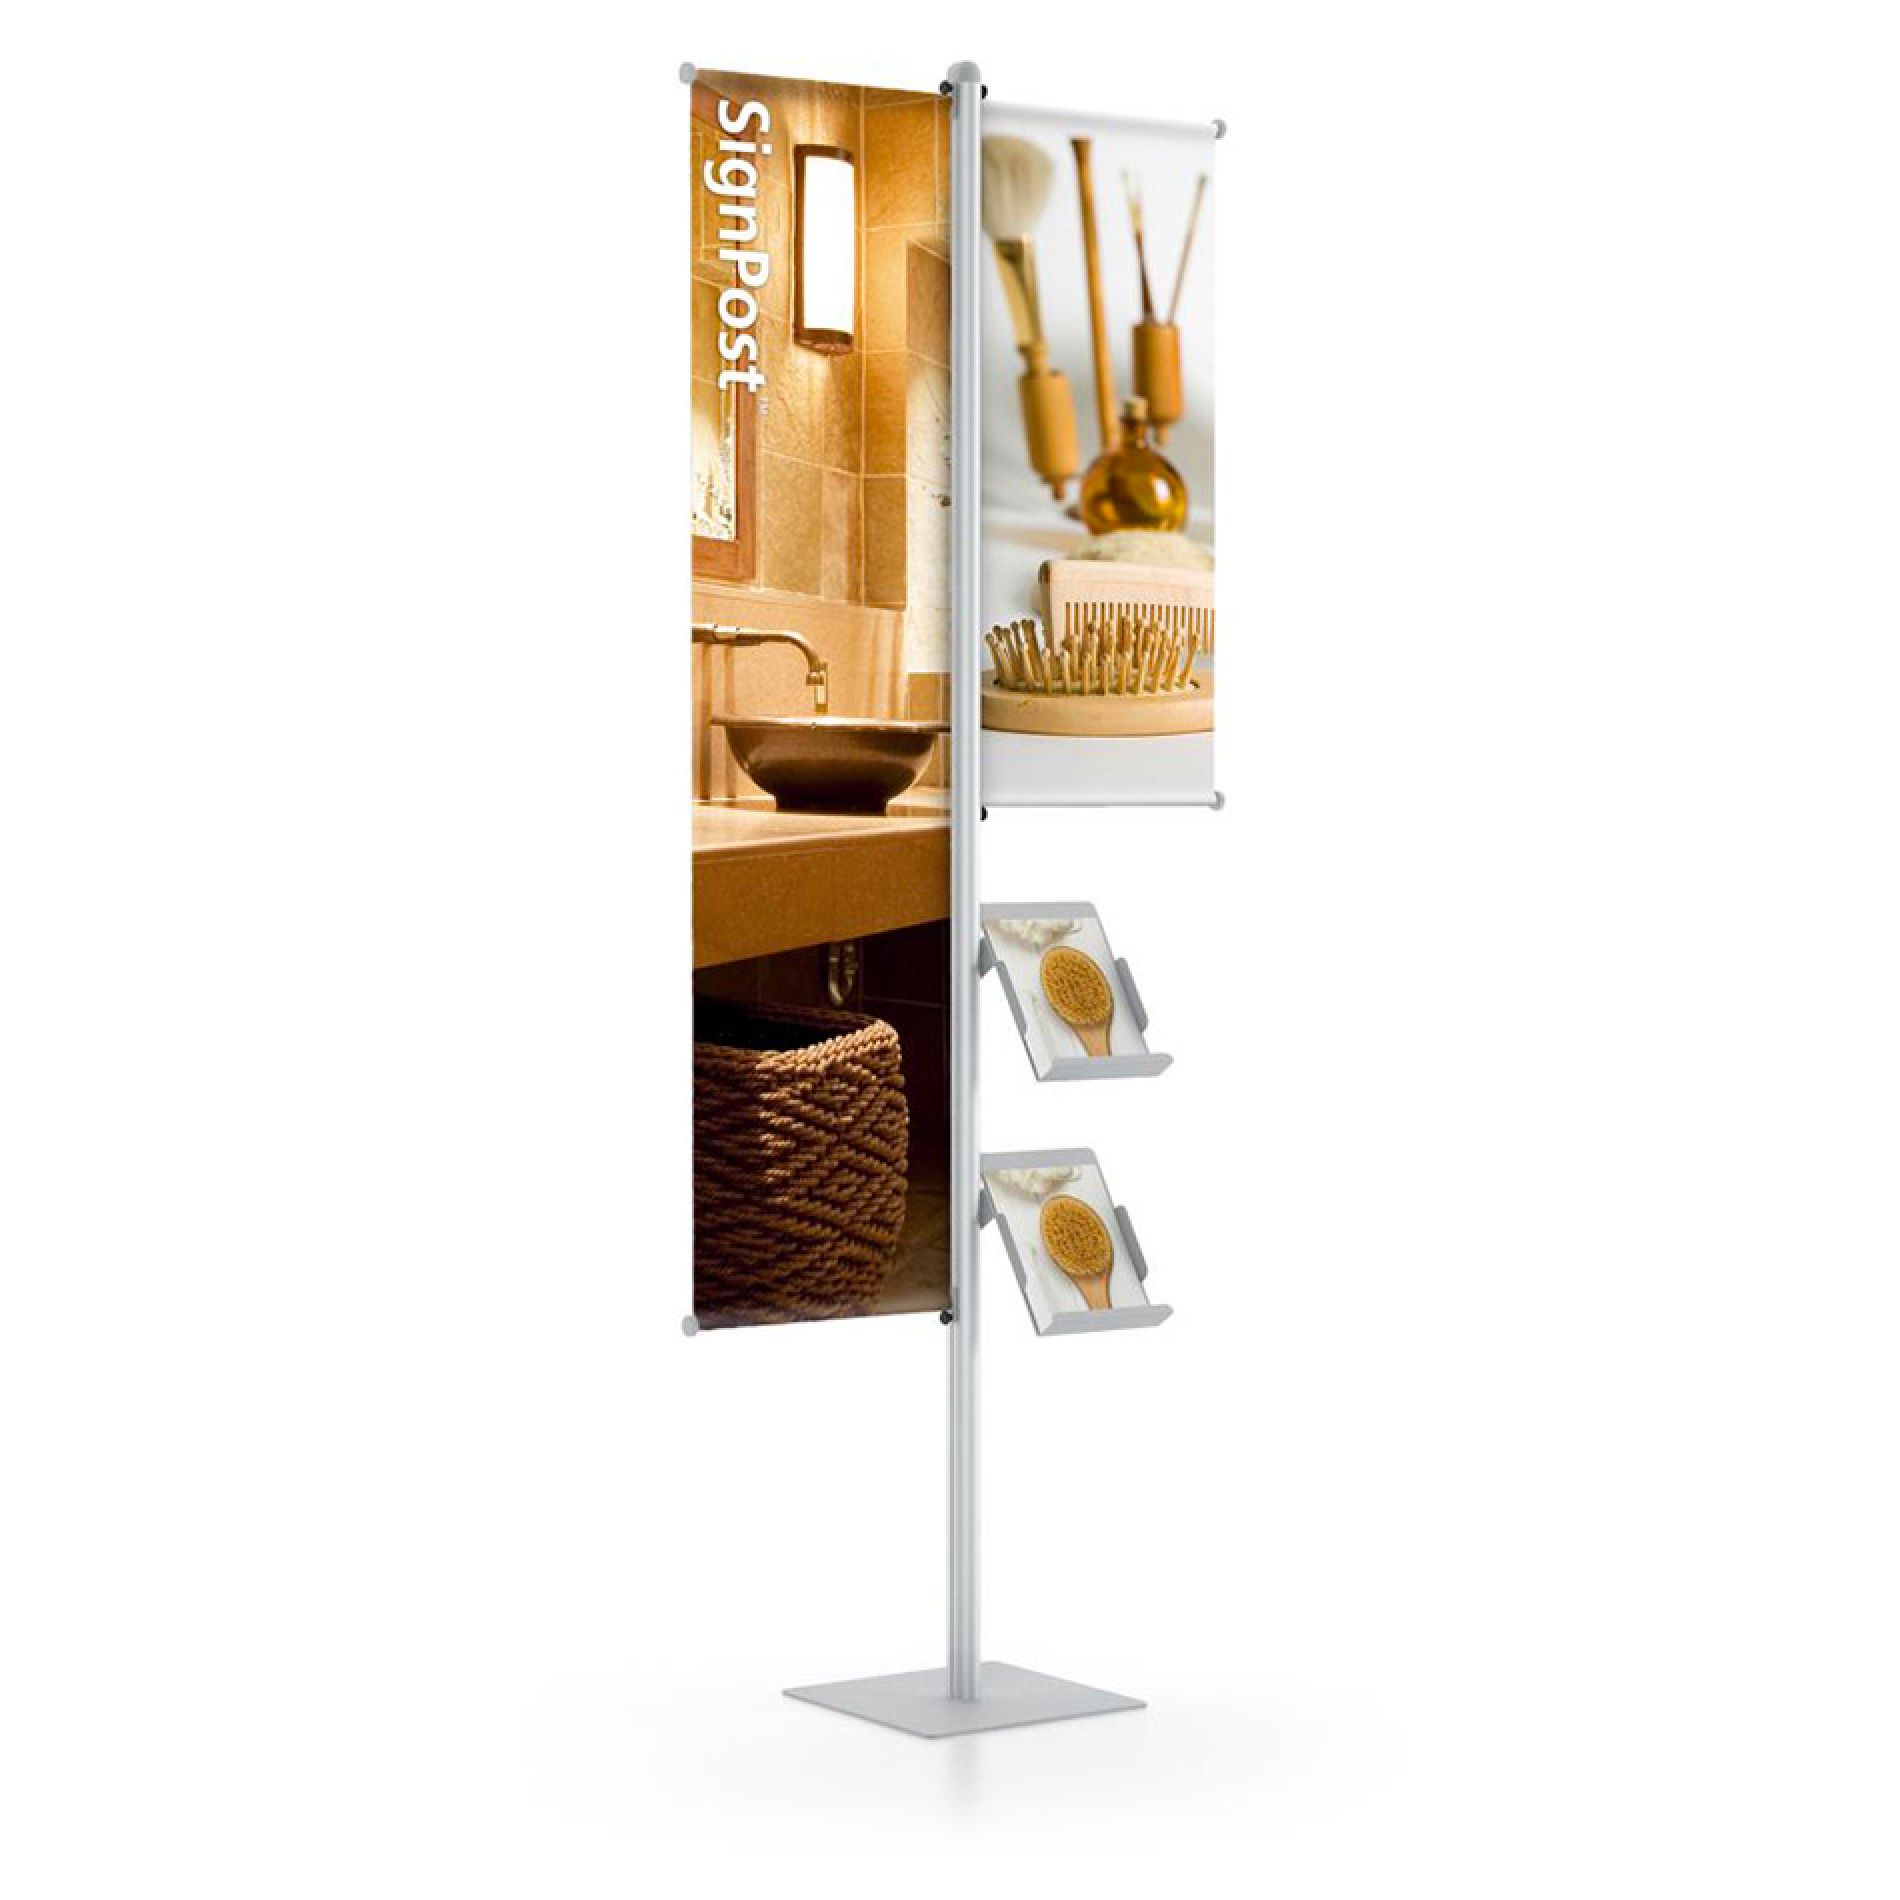 Portable Slatwall Stands Gallery Image